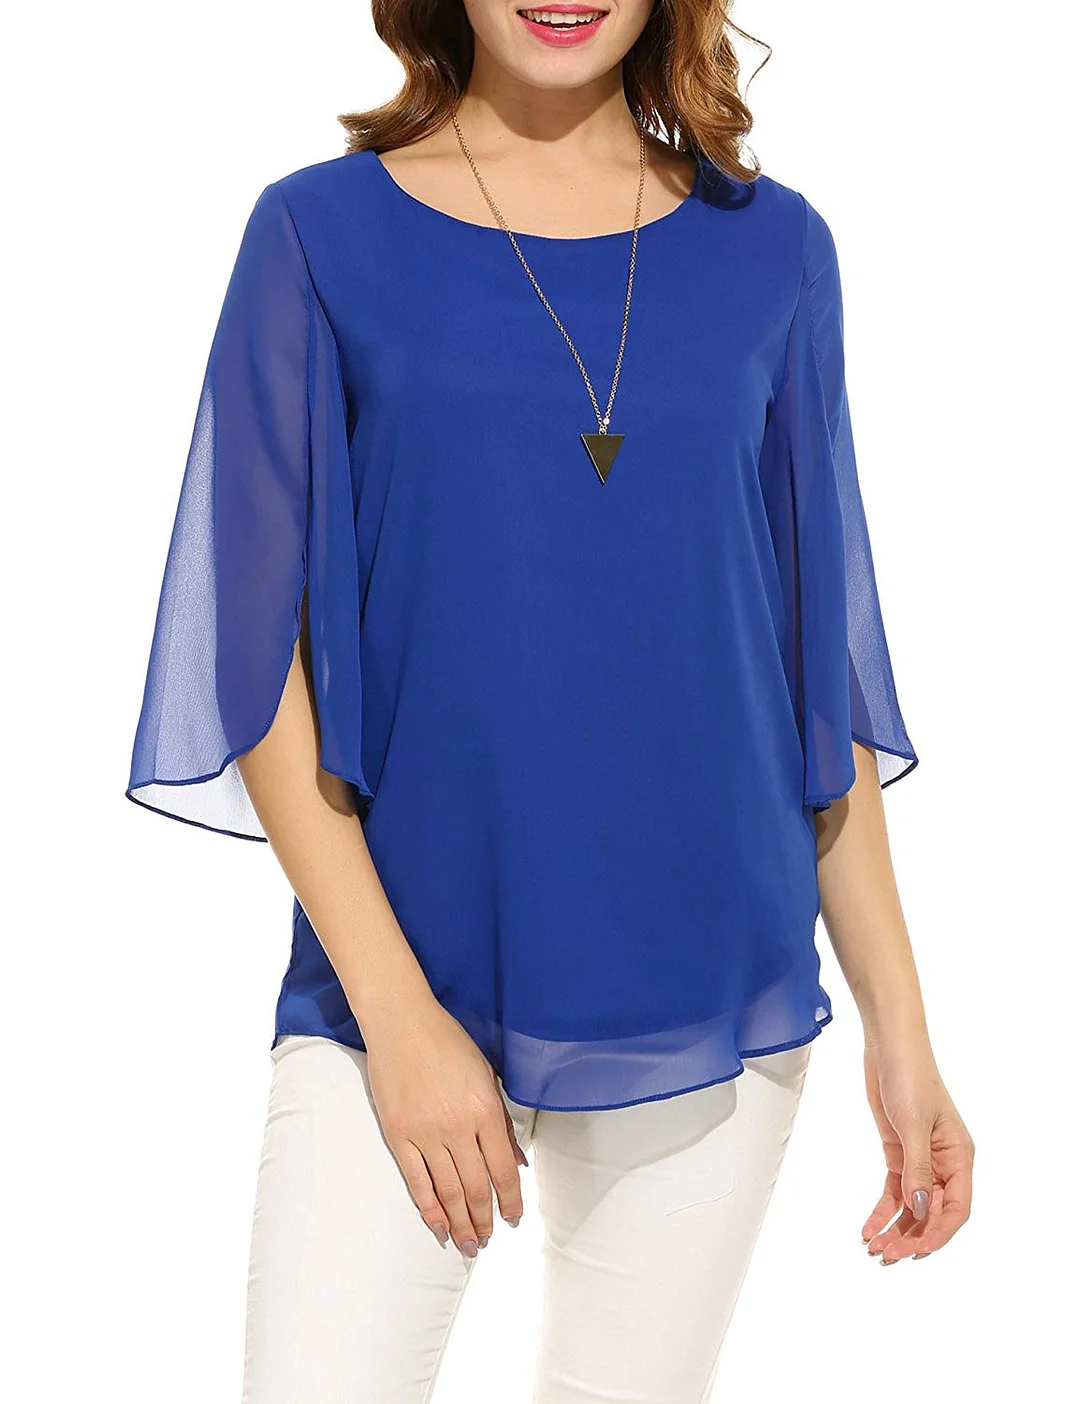 Womens Casual Scoop Neck Loose Top 3/4 Sleeve Chiffon Blouse Shirt Tops